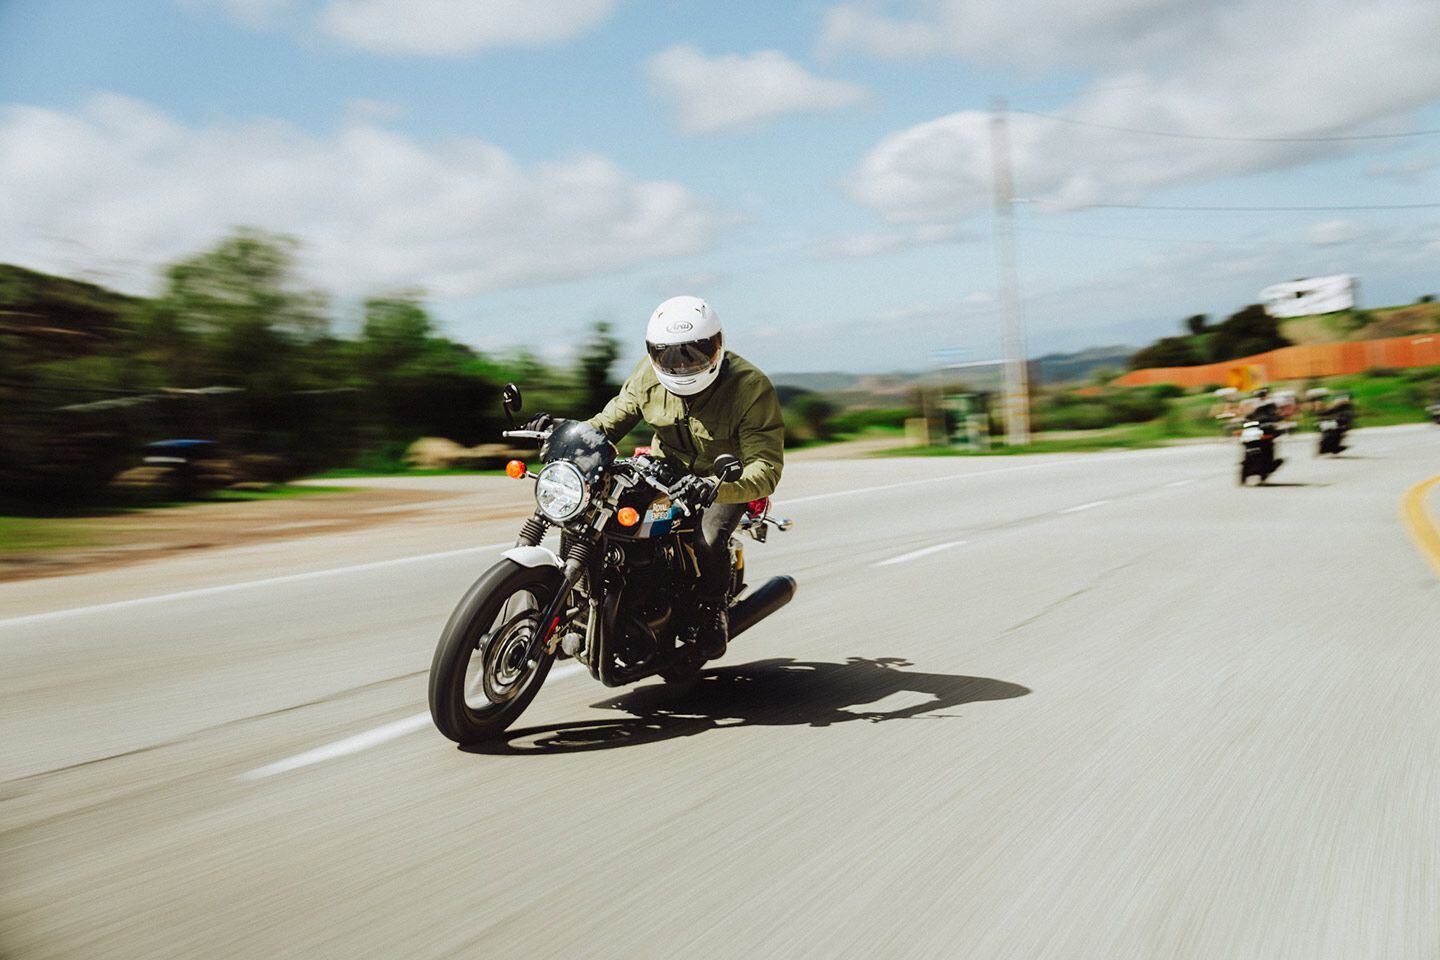 Cruising along California’s iconic Pacific Coast Highway, the Continental GT 650’s ergonomics can be a bit aggressive for tall riders, but worth it for the custom style.